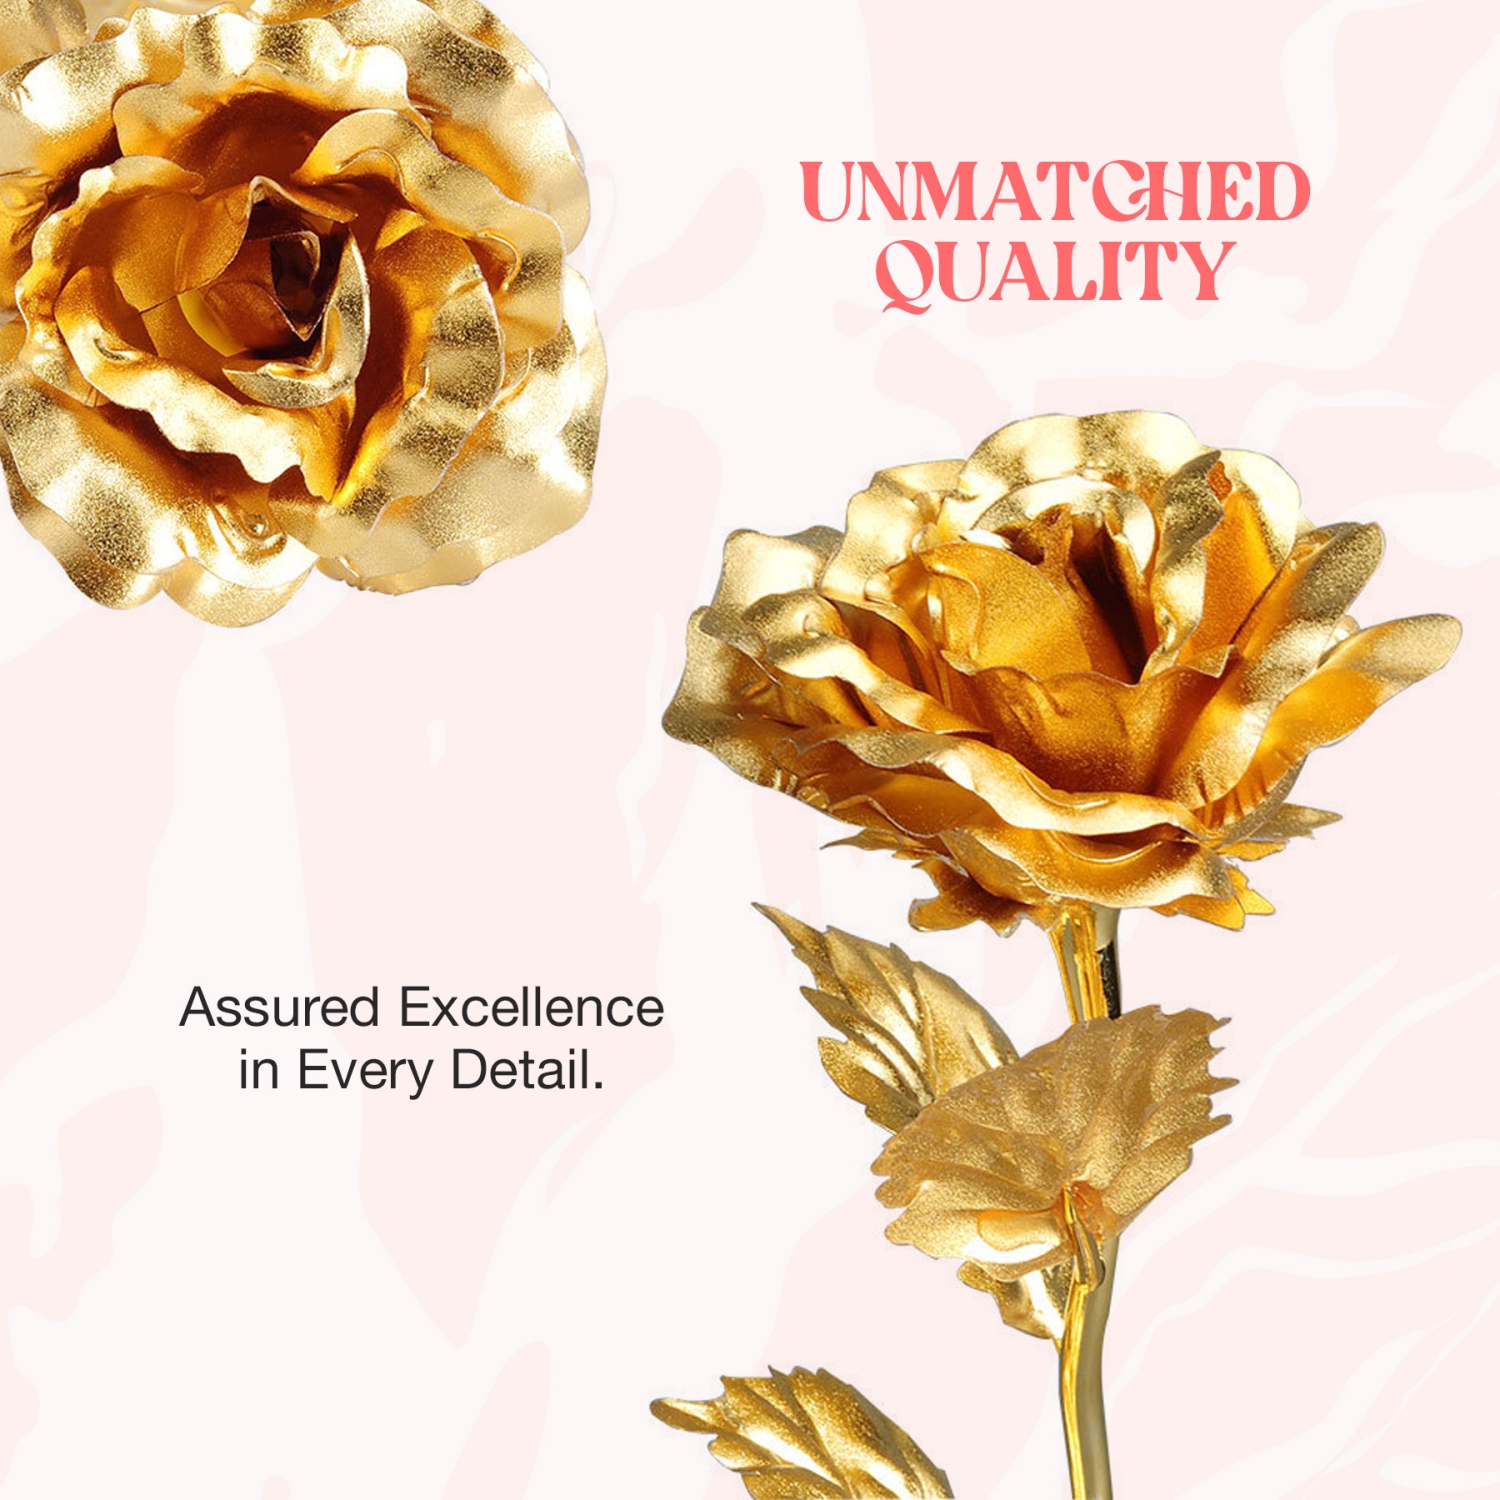 24k Gold Rose with Luxury Gift Box - 10-inch Golden Rose Metal